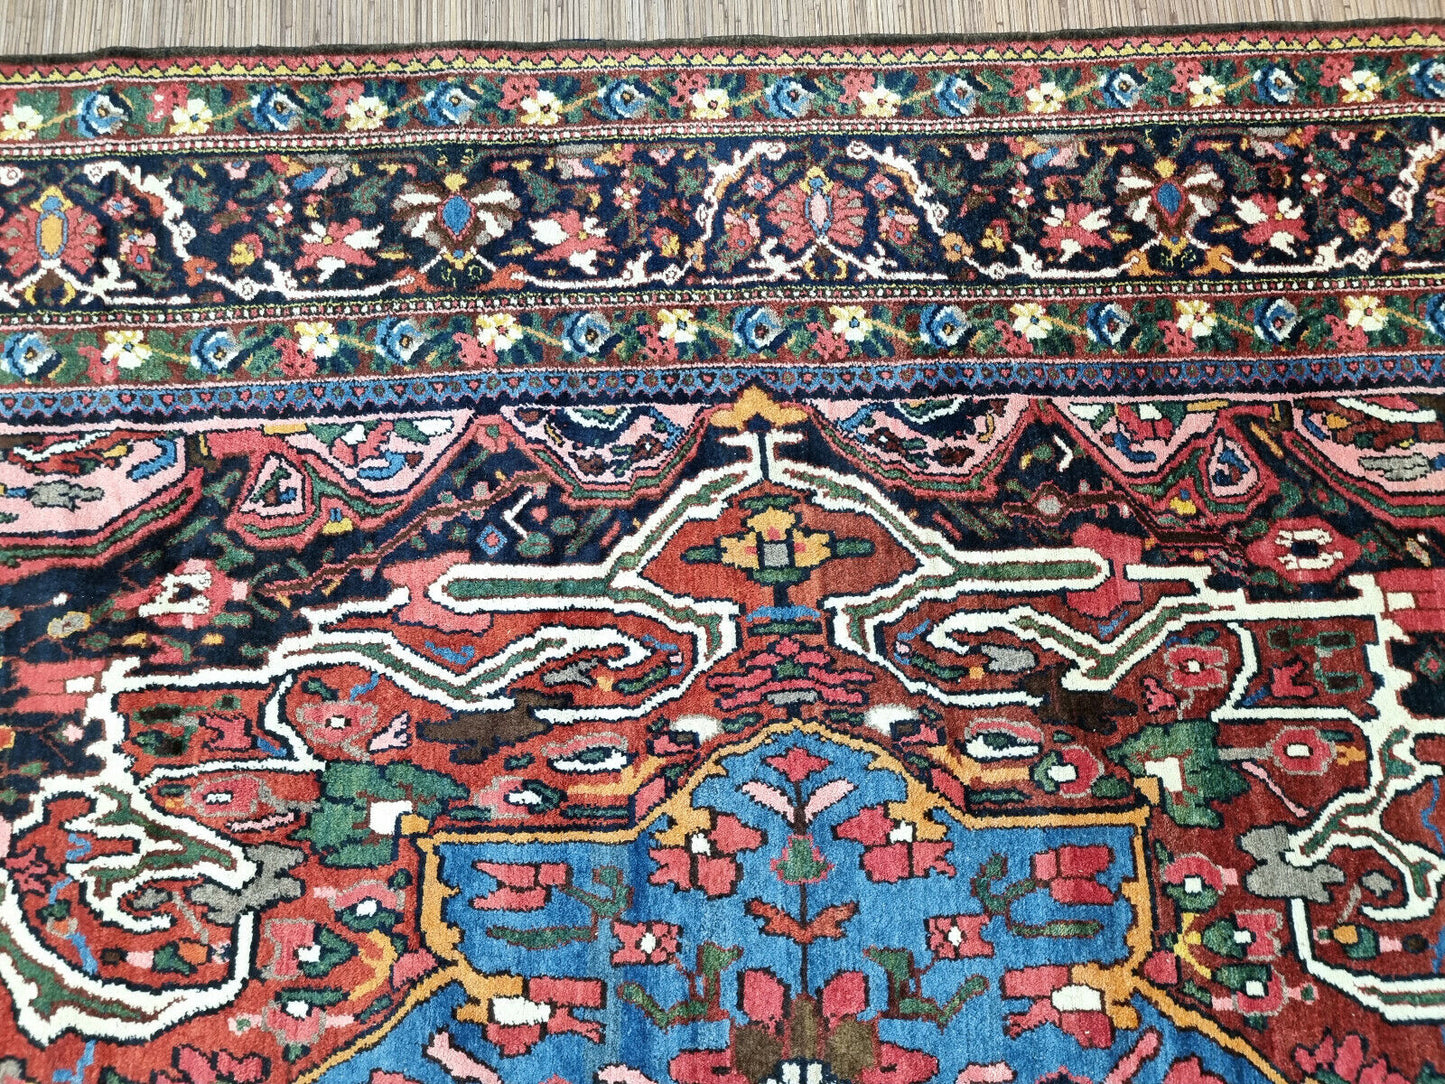 Close-up of ancient Persian craftsmanship on Handmade Antique Persian Bakhtiari Rug - Detailed view emphasizing the craftsmanship and cultural heritage reflected in the rug's design.